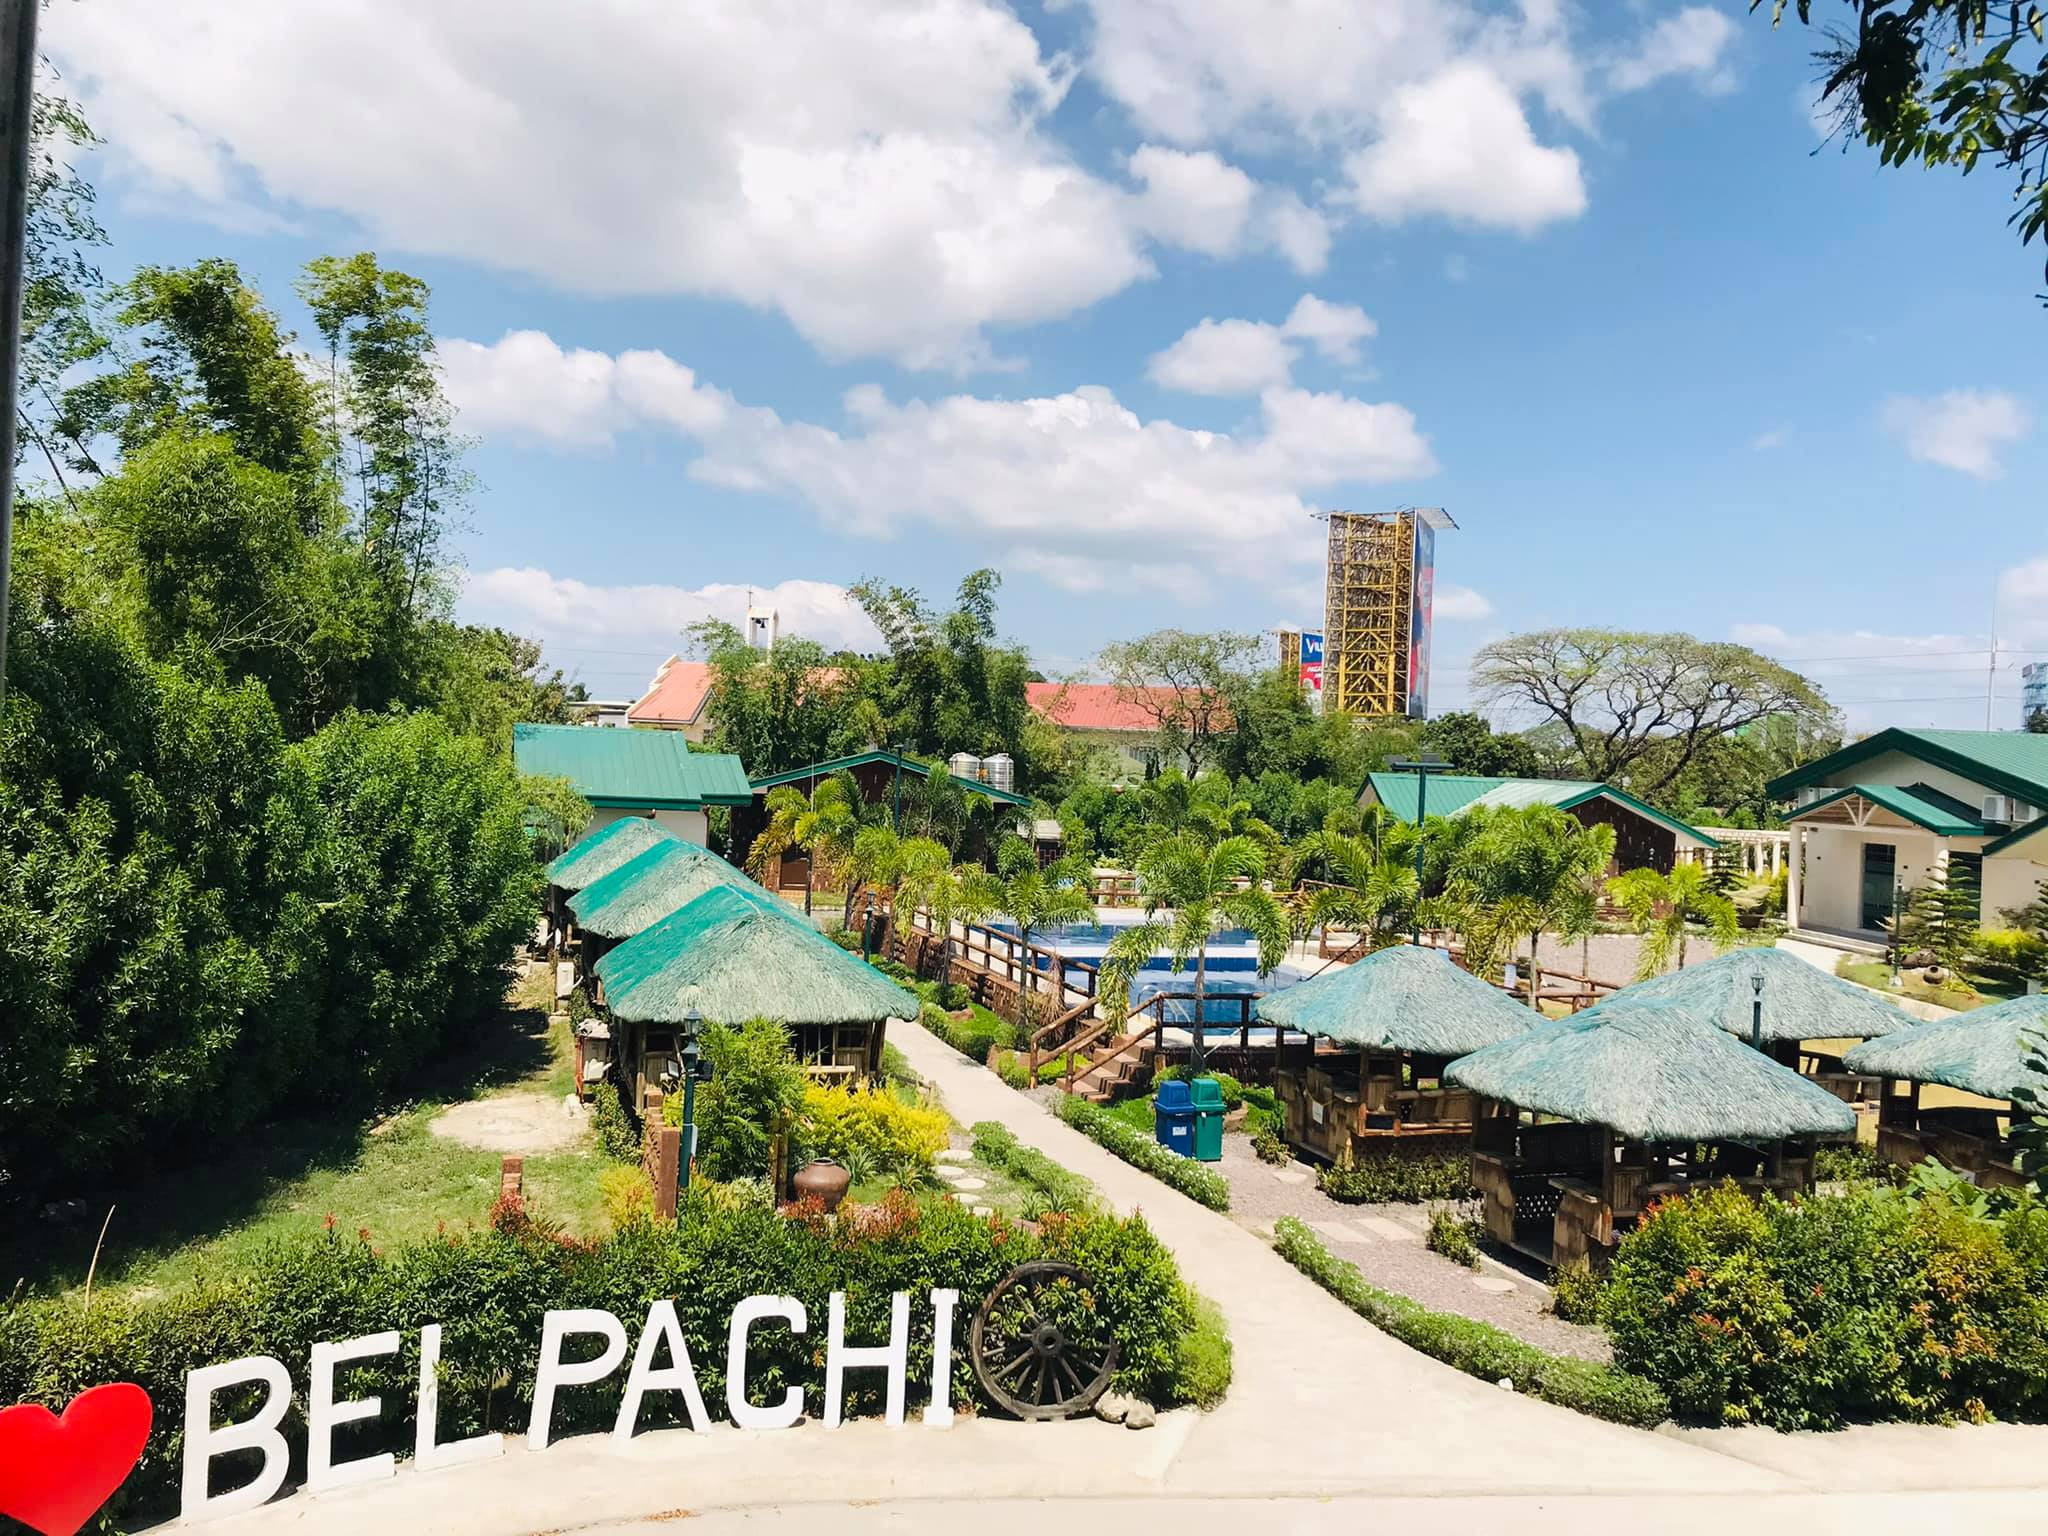 Belpachi Resort and Events